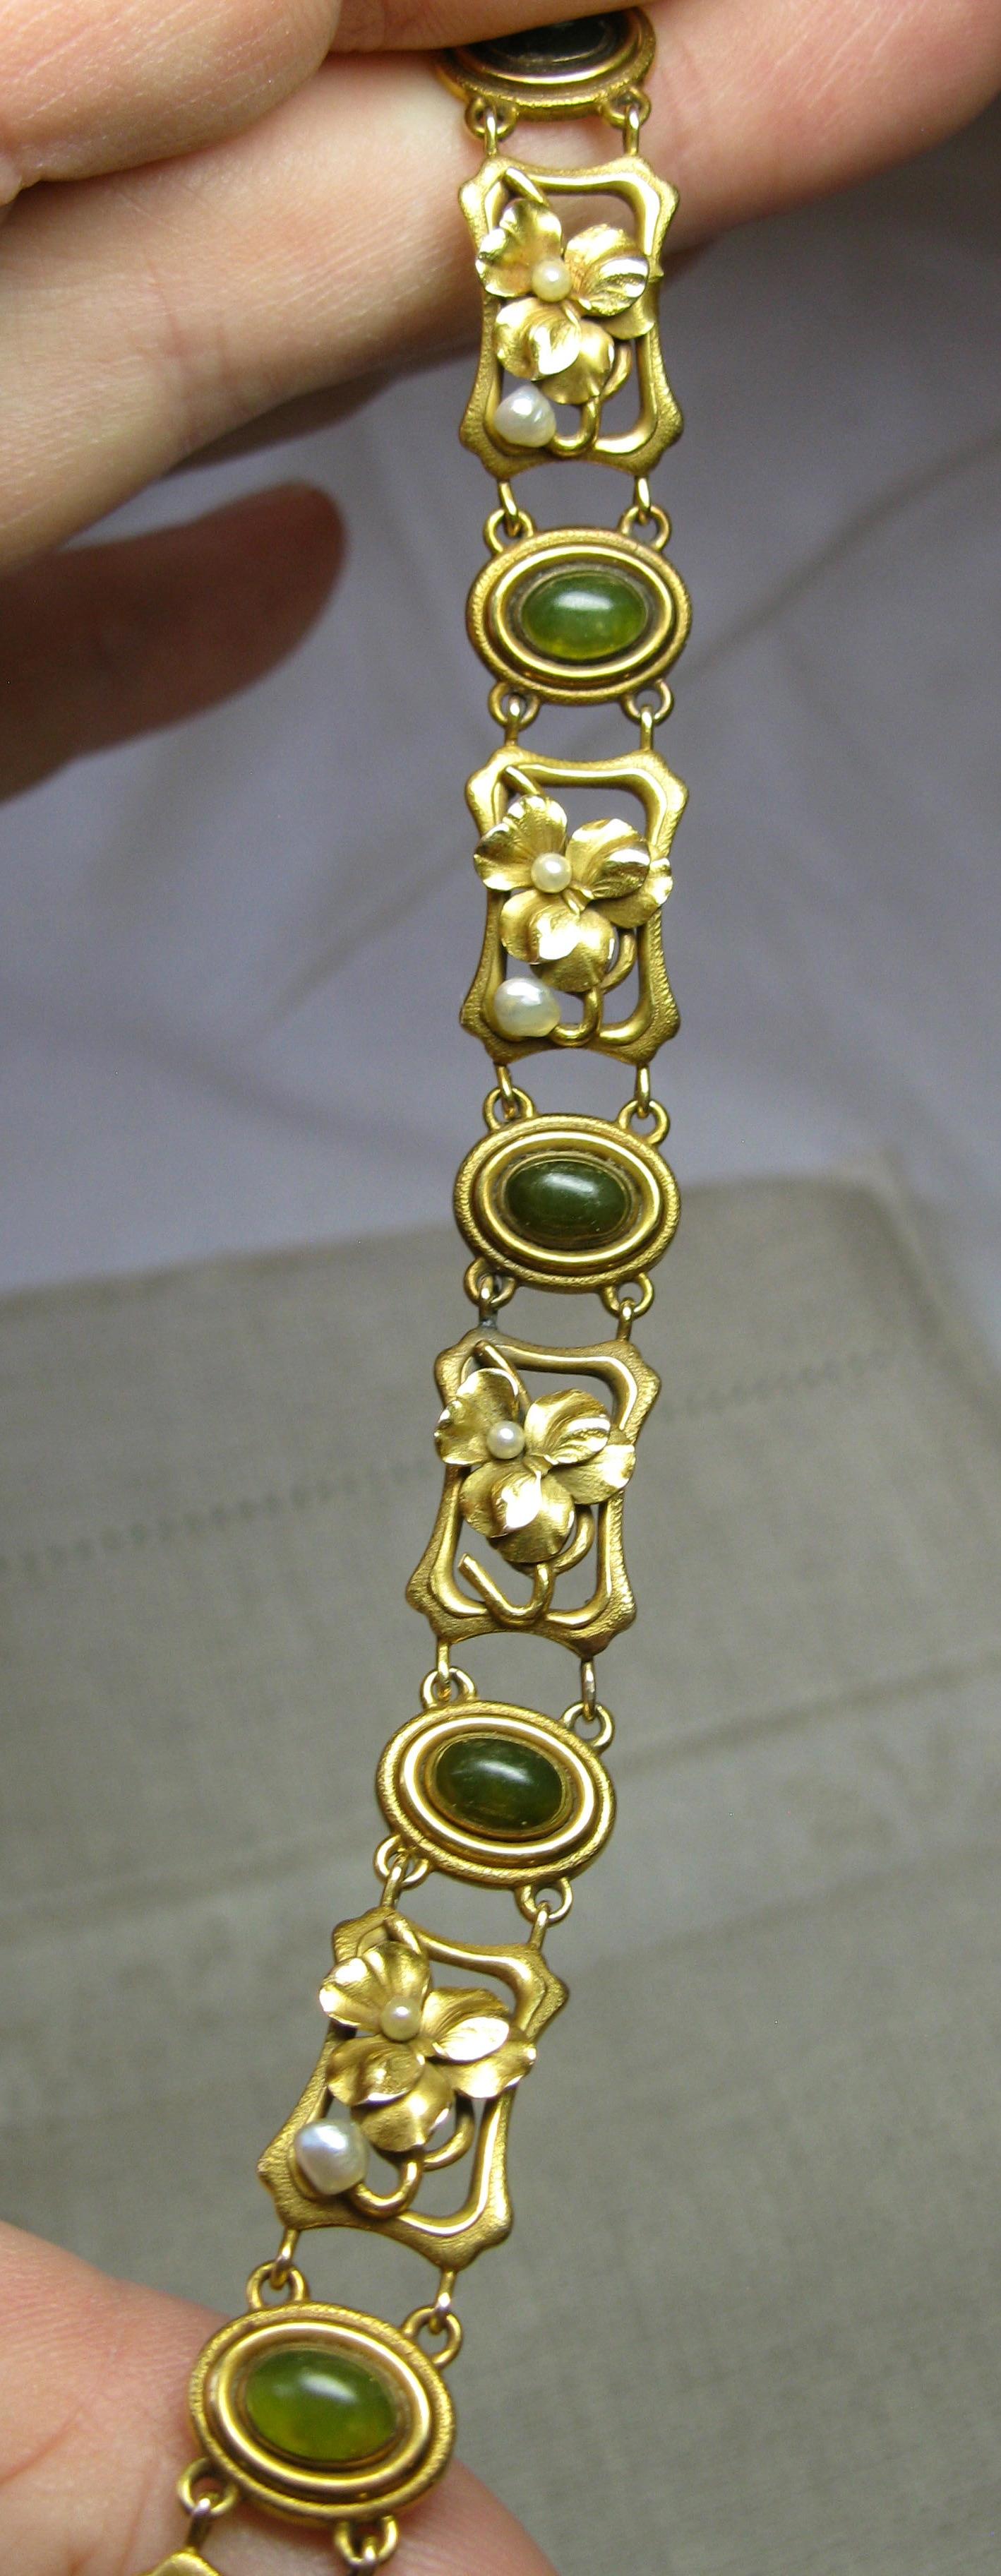 THIS IS A SUPERB RARE JADE ART NOUVEAU BELLE EPOQUE BRACELET WITH 6 EXTRAORDINARY NATURAL ANTIQUE JADE CABOCHONS OF INCREDIBLE BEAUTY SET IN A 14 KARAT GOLD ART NOUVEAU SETTING WITH FULLY MODELED THREE-DIMENSIONAL PANSY FLOWERS WITH PEARL ACCENTS IN